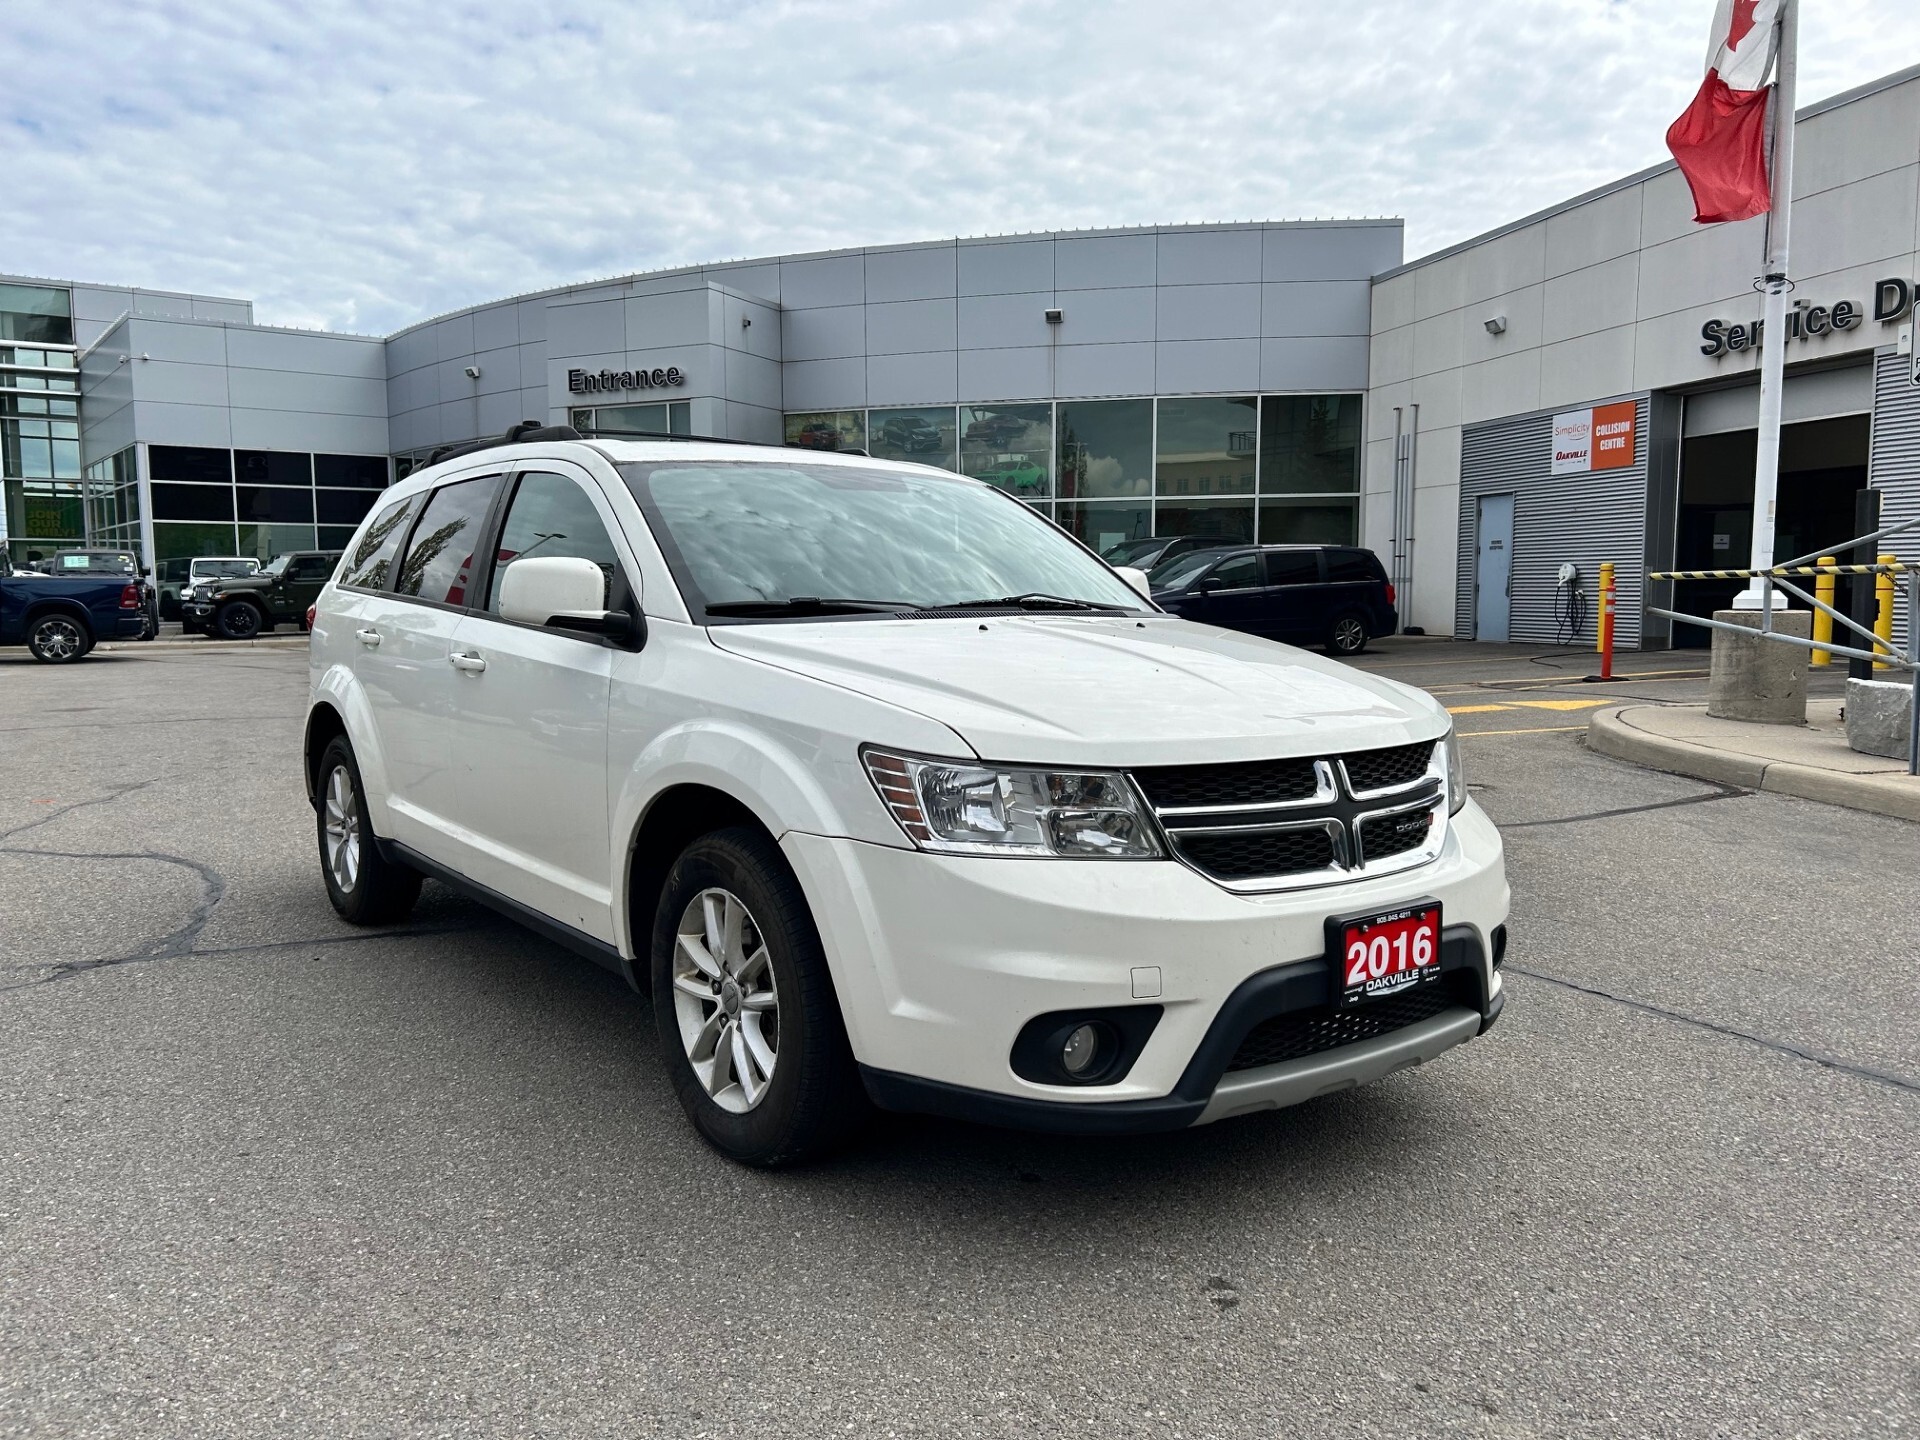 2016 Dodge Journey FWD 4dr SXT | 3RD ROW SEATING | V6 | REAR AIR |